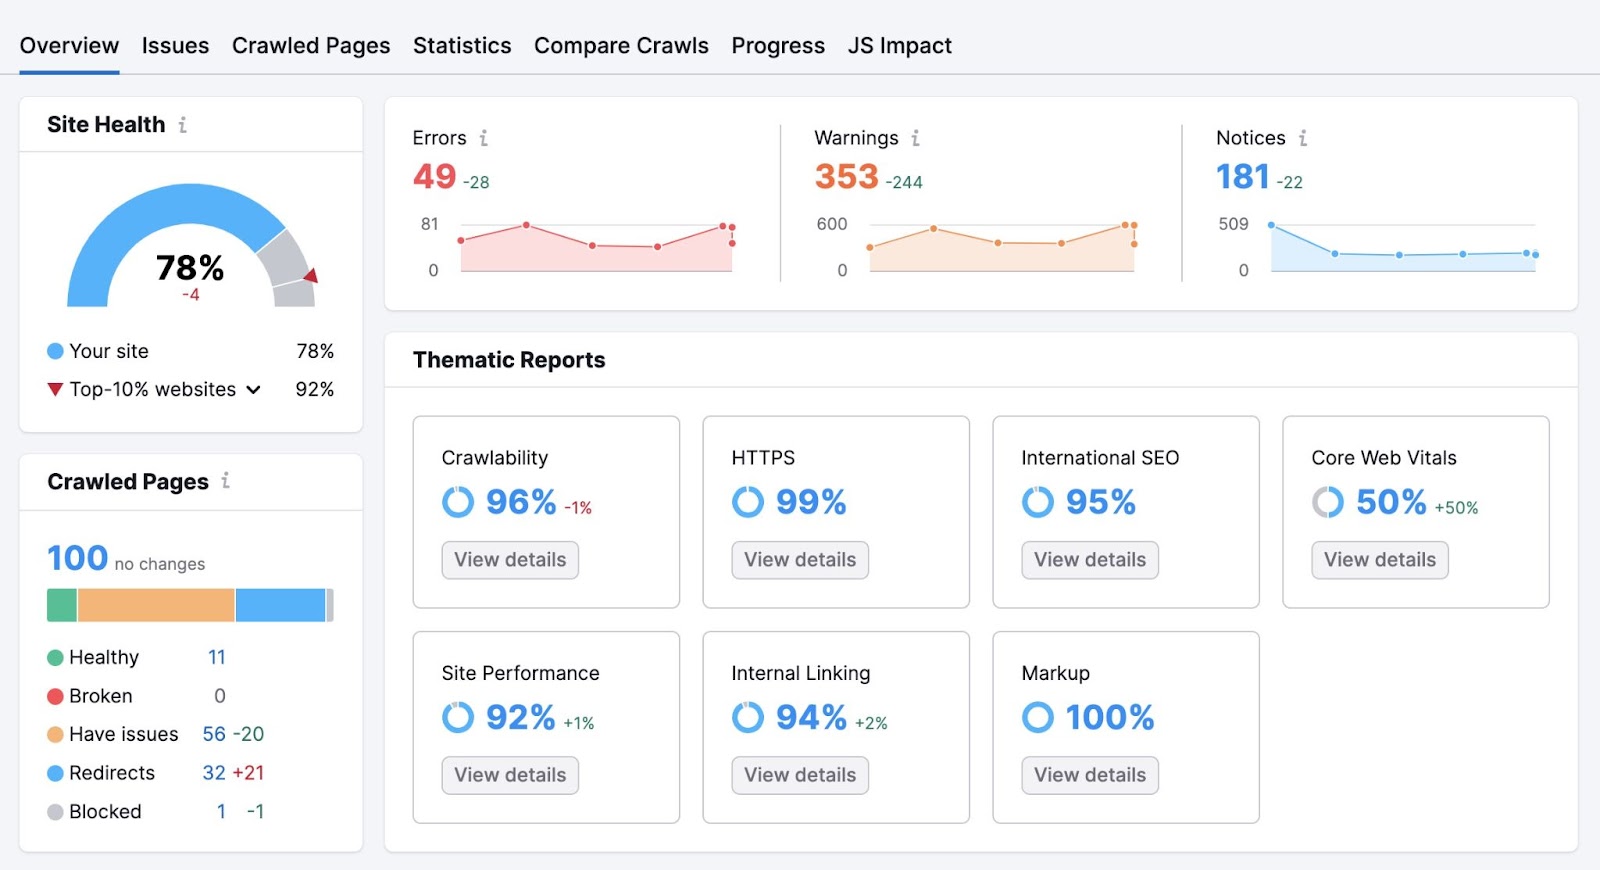 "Overview" on "Site Audit" showing site health, breakdown of crawled pages, thematic reports, and errors, warnings & notices.